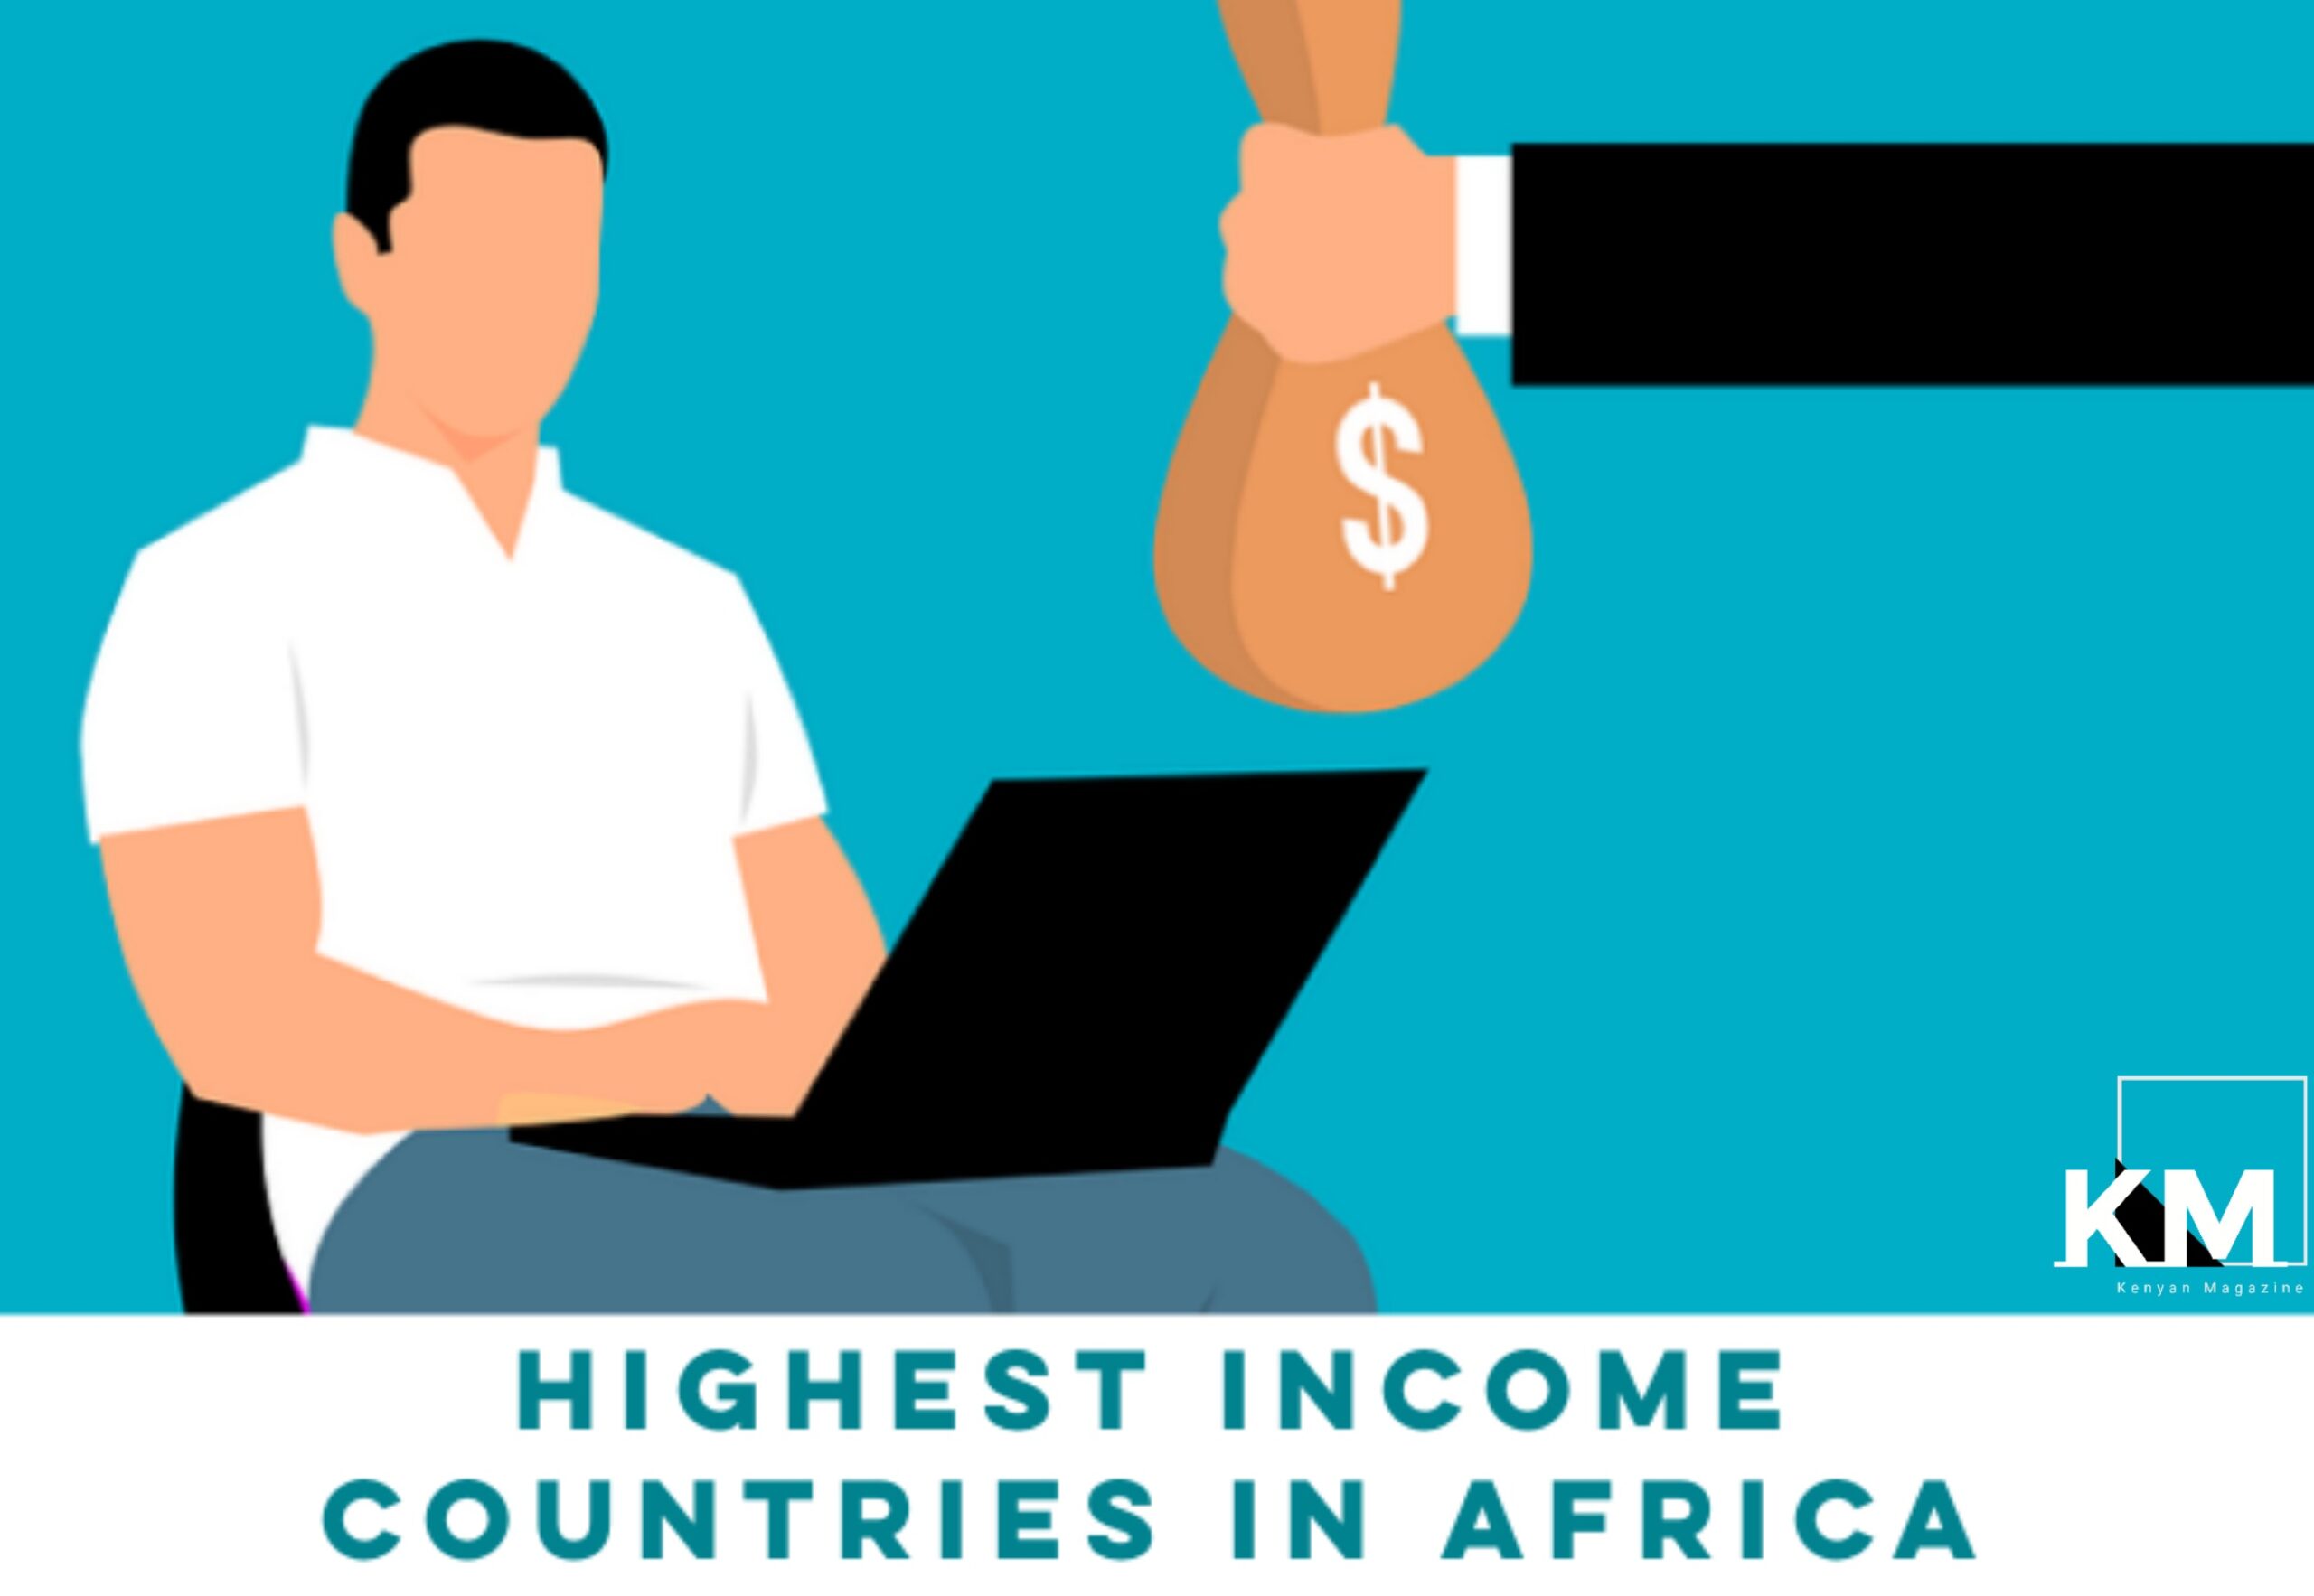 High Income African countries